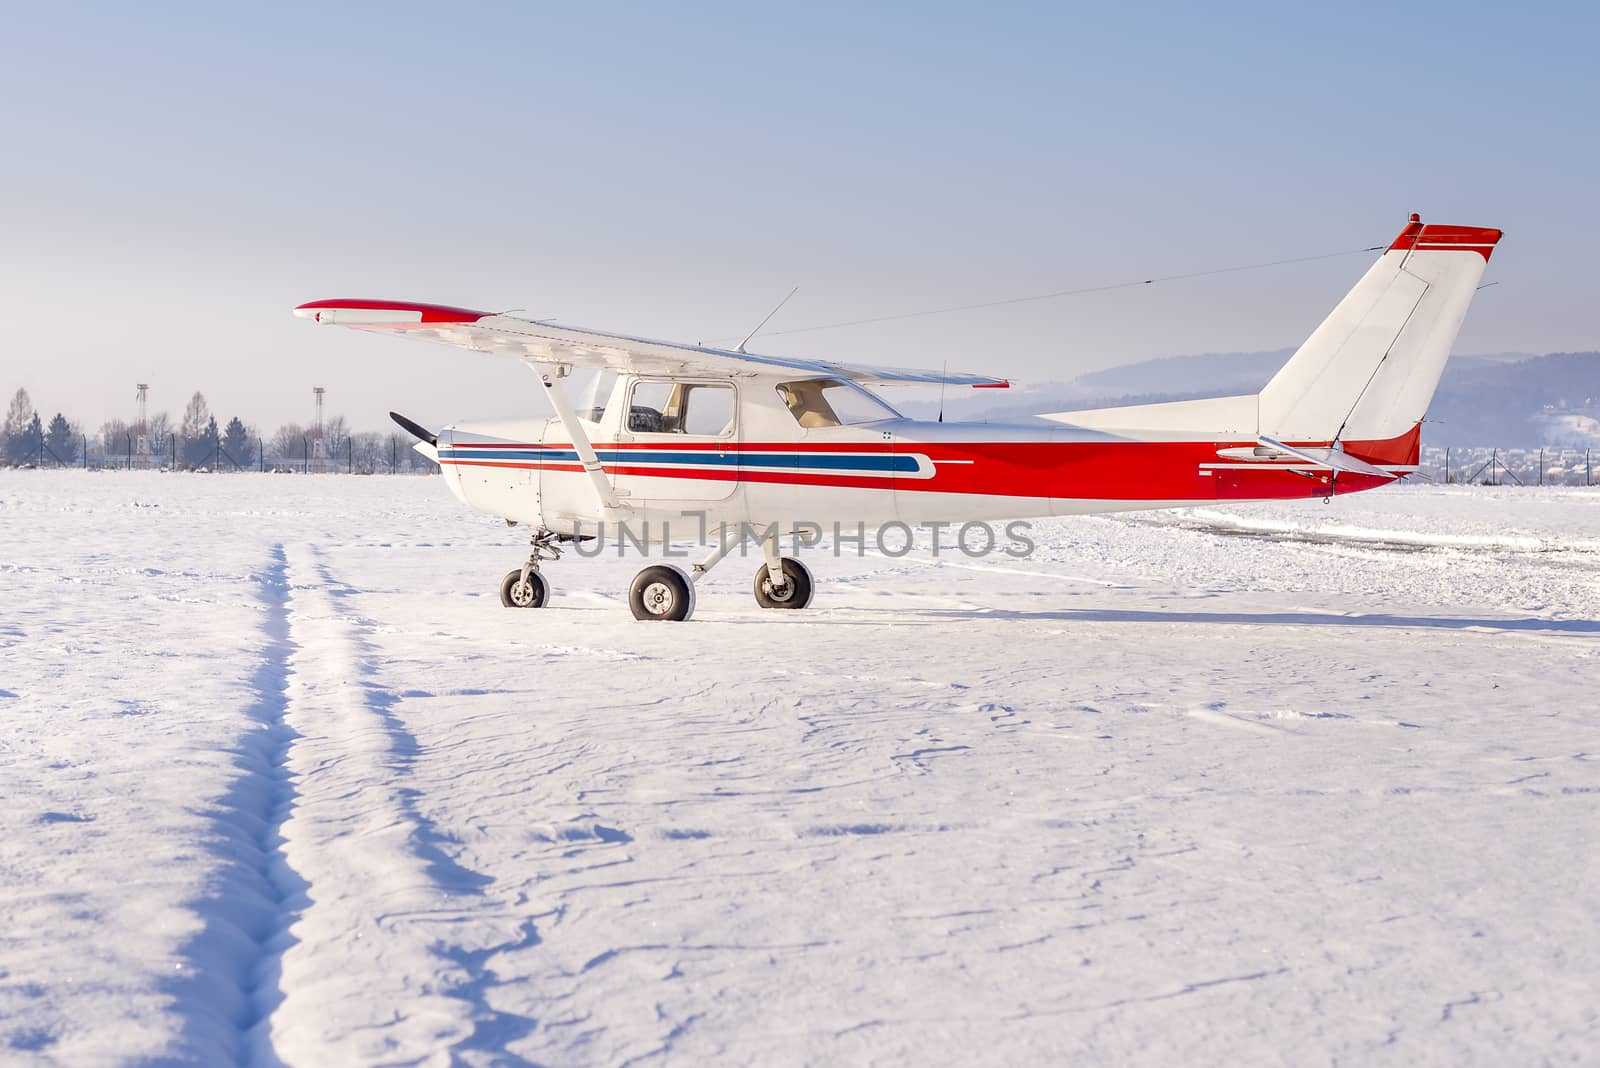 Small sports plane in winter at snow covered airport by asafaric